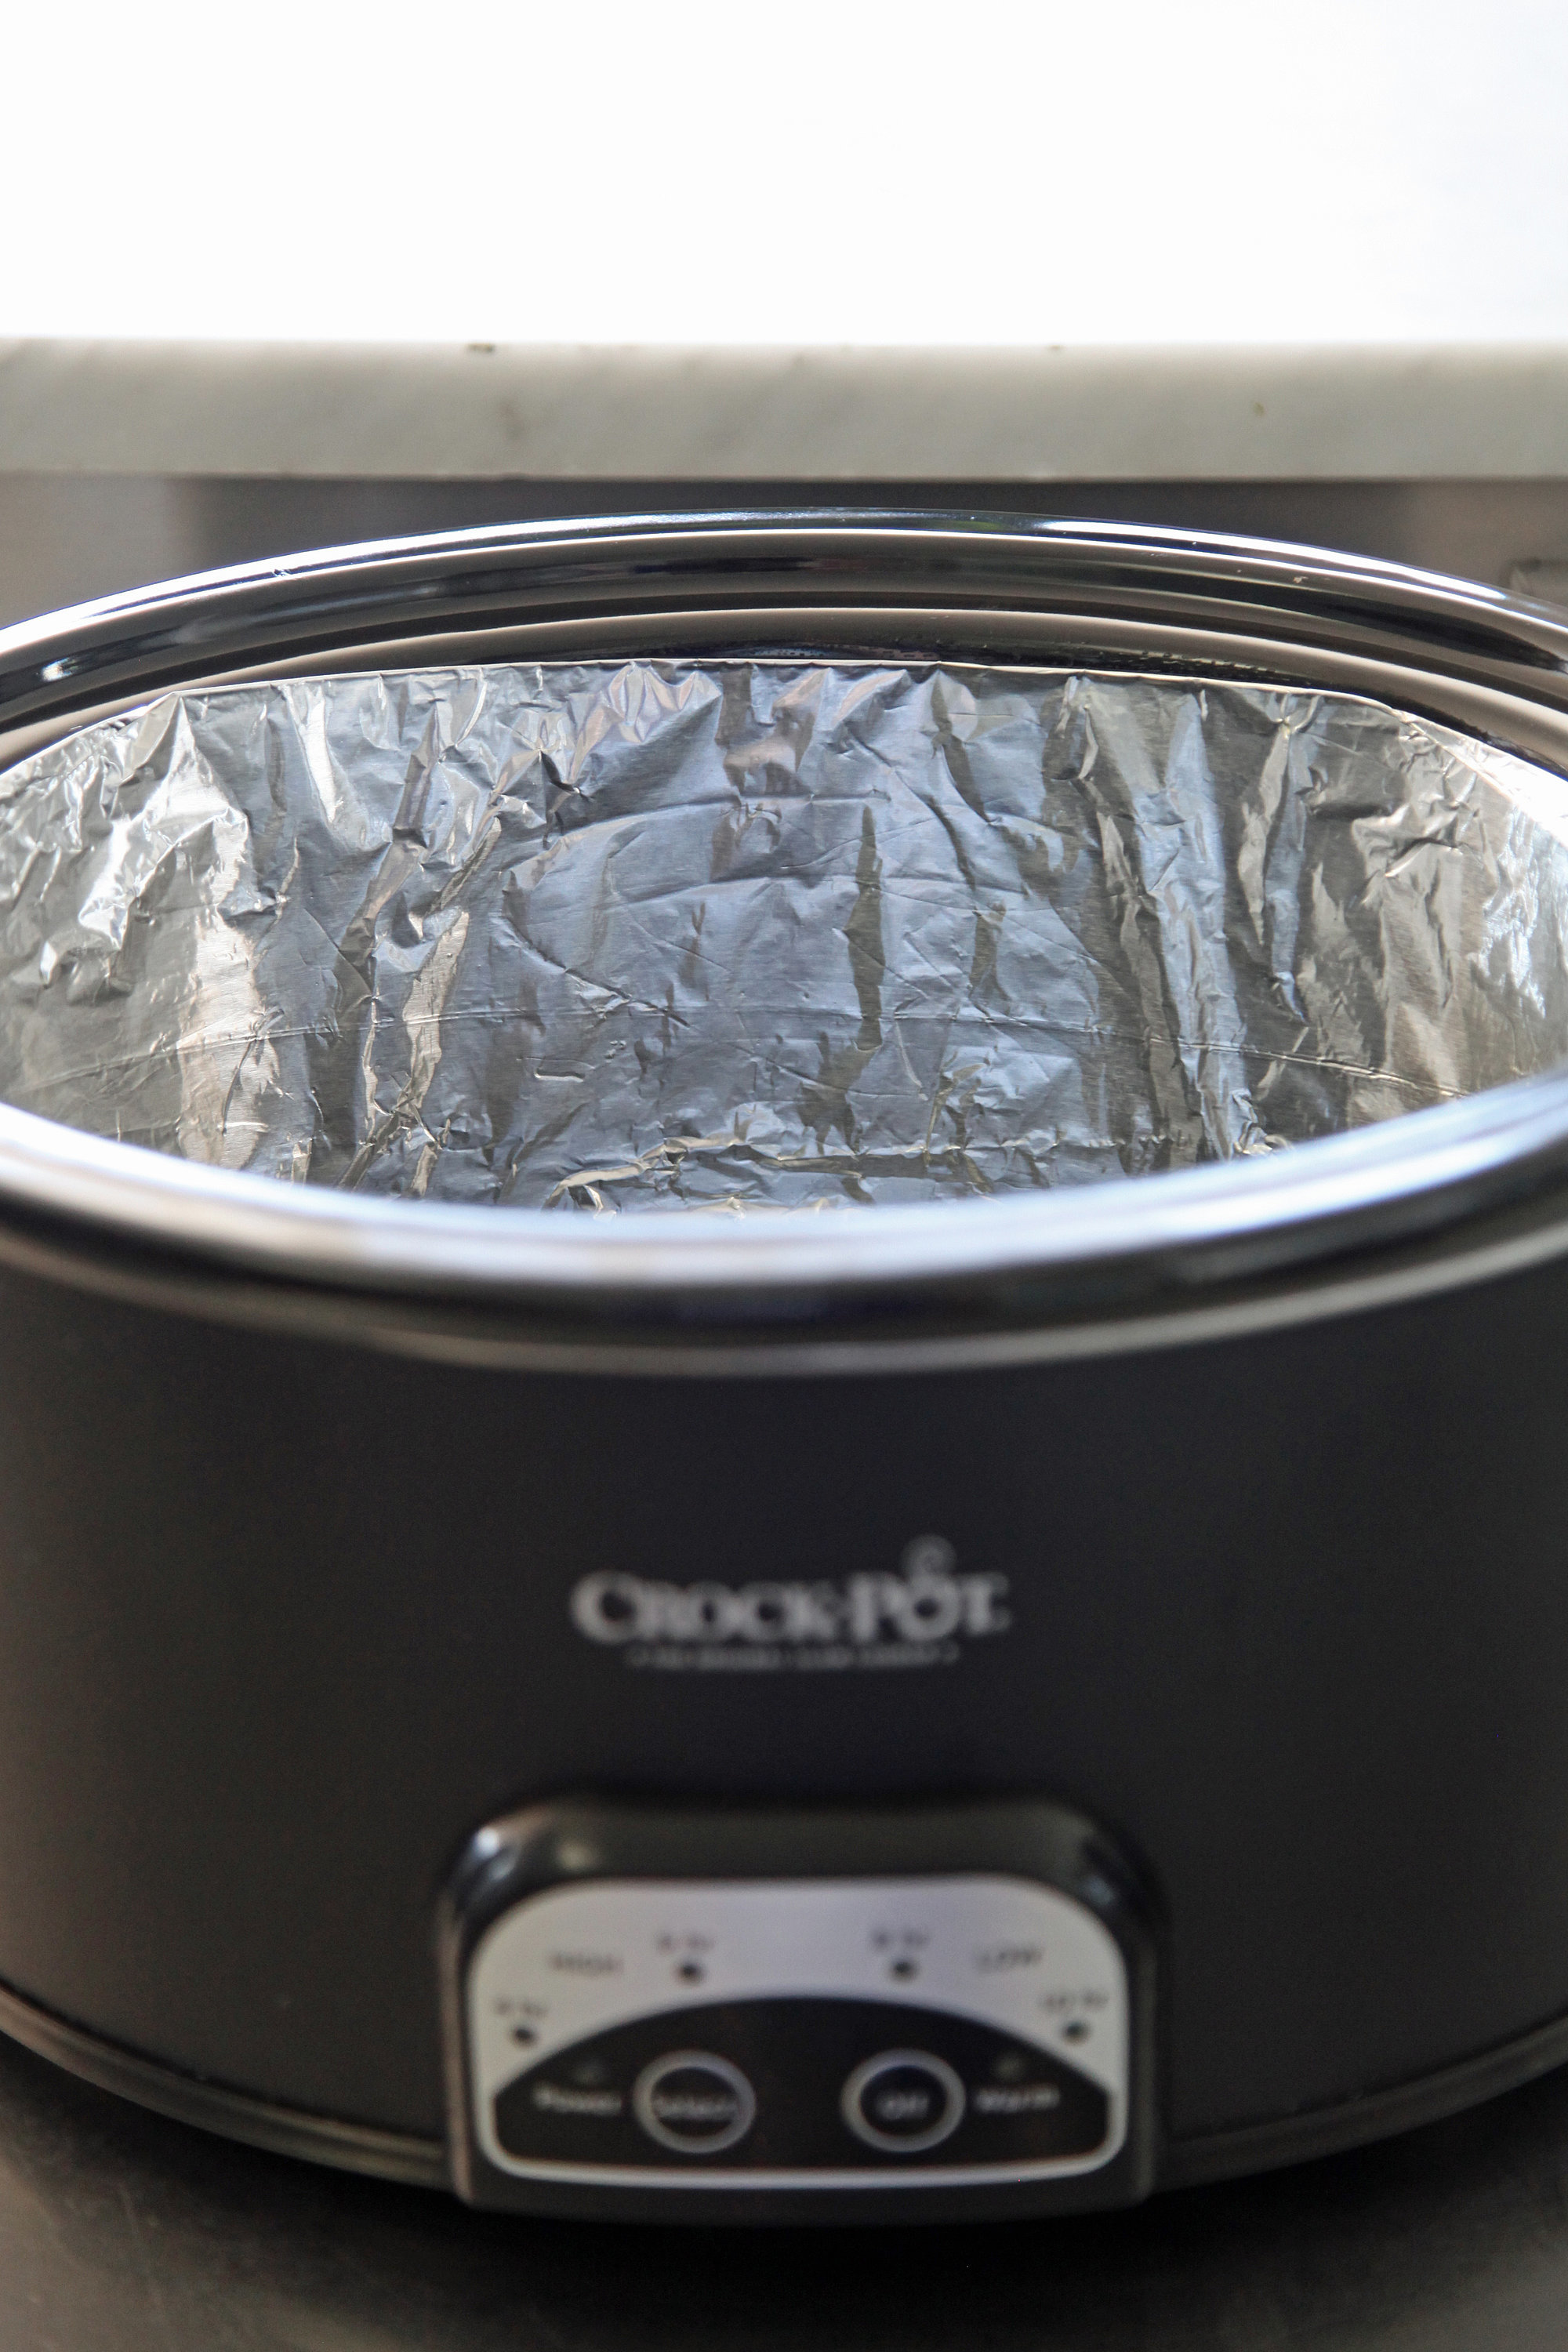 Here's The Best Place To Set Up Your Slow Cooker